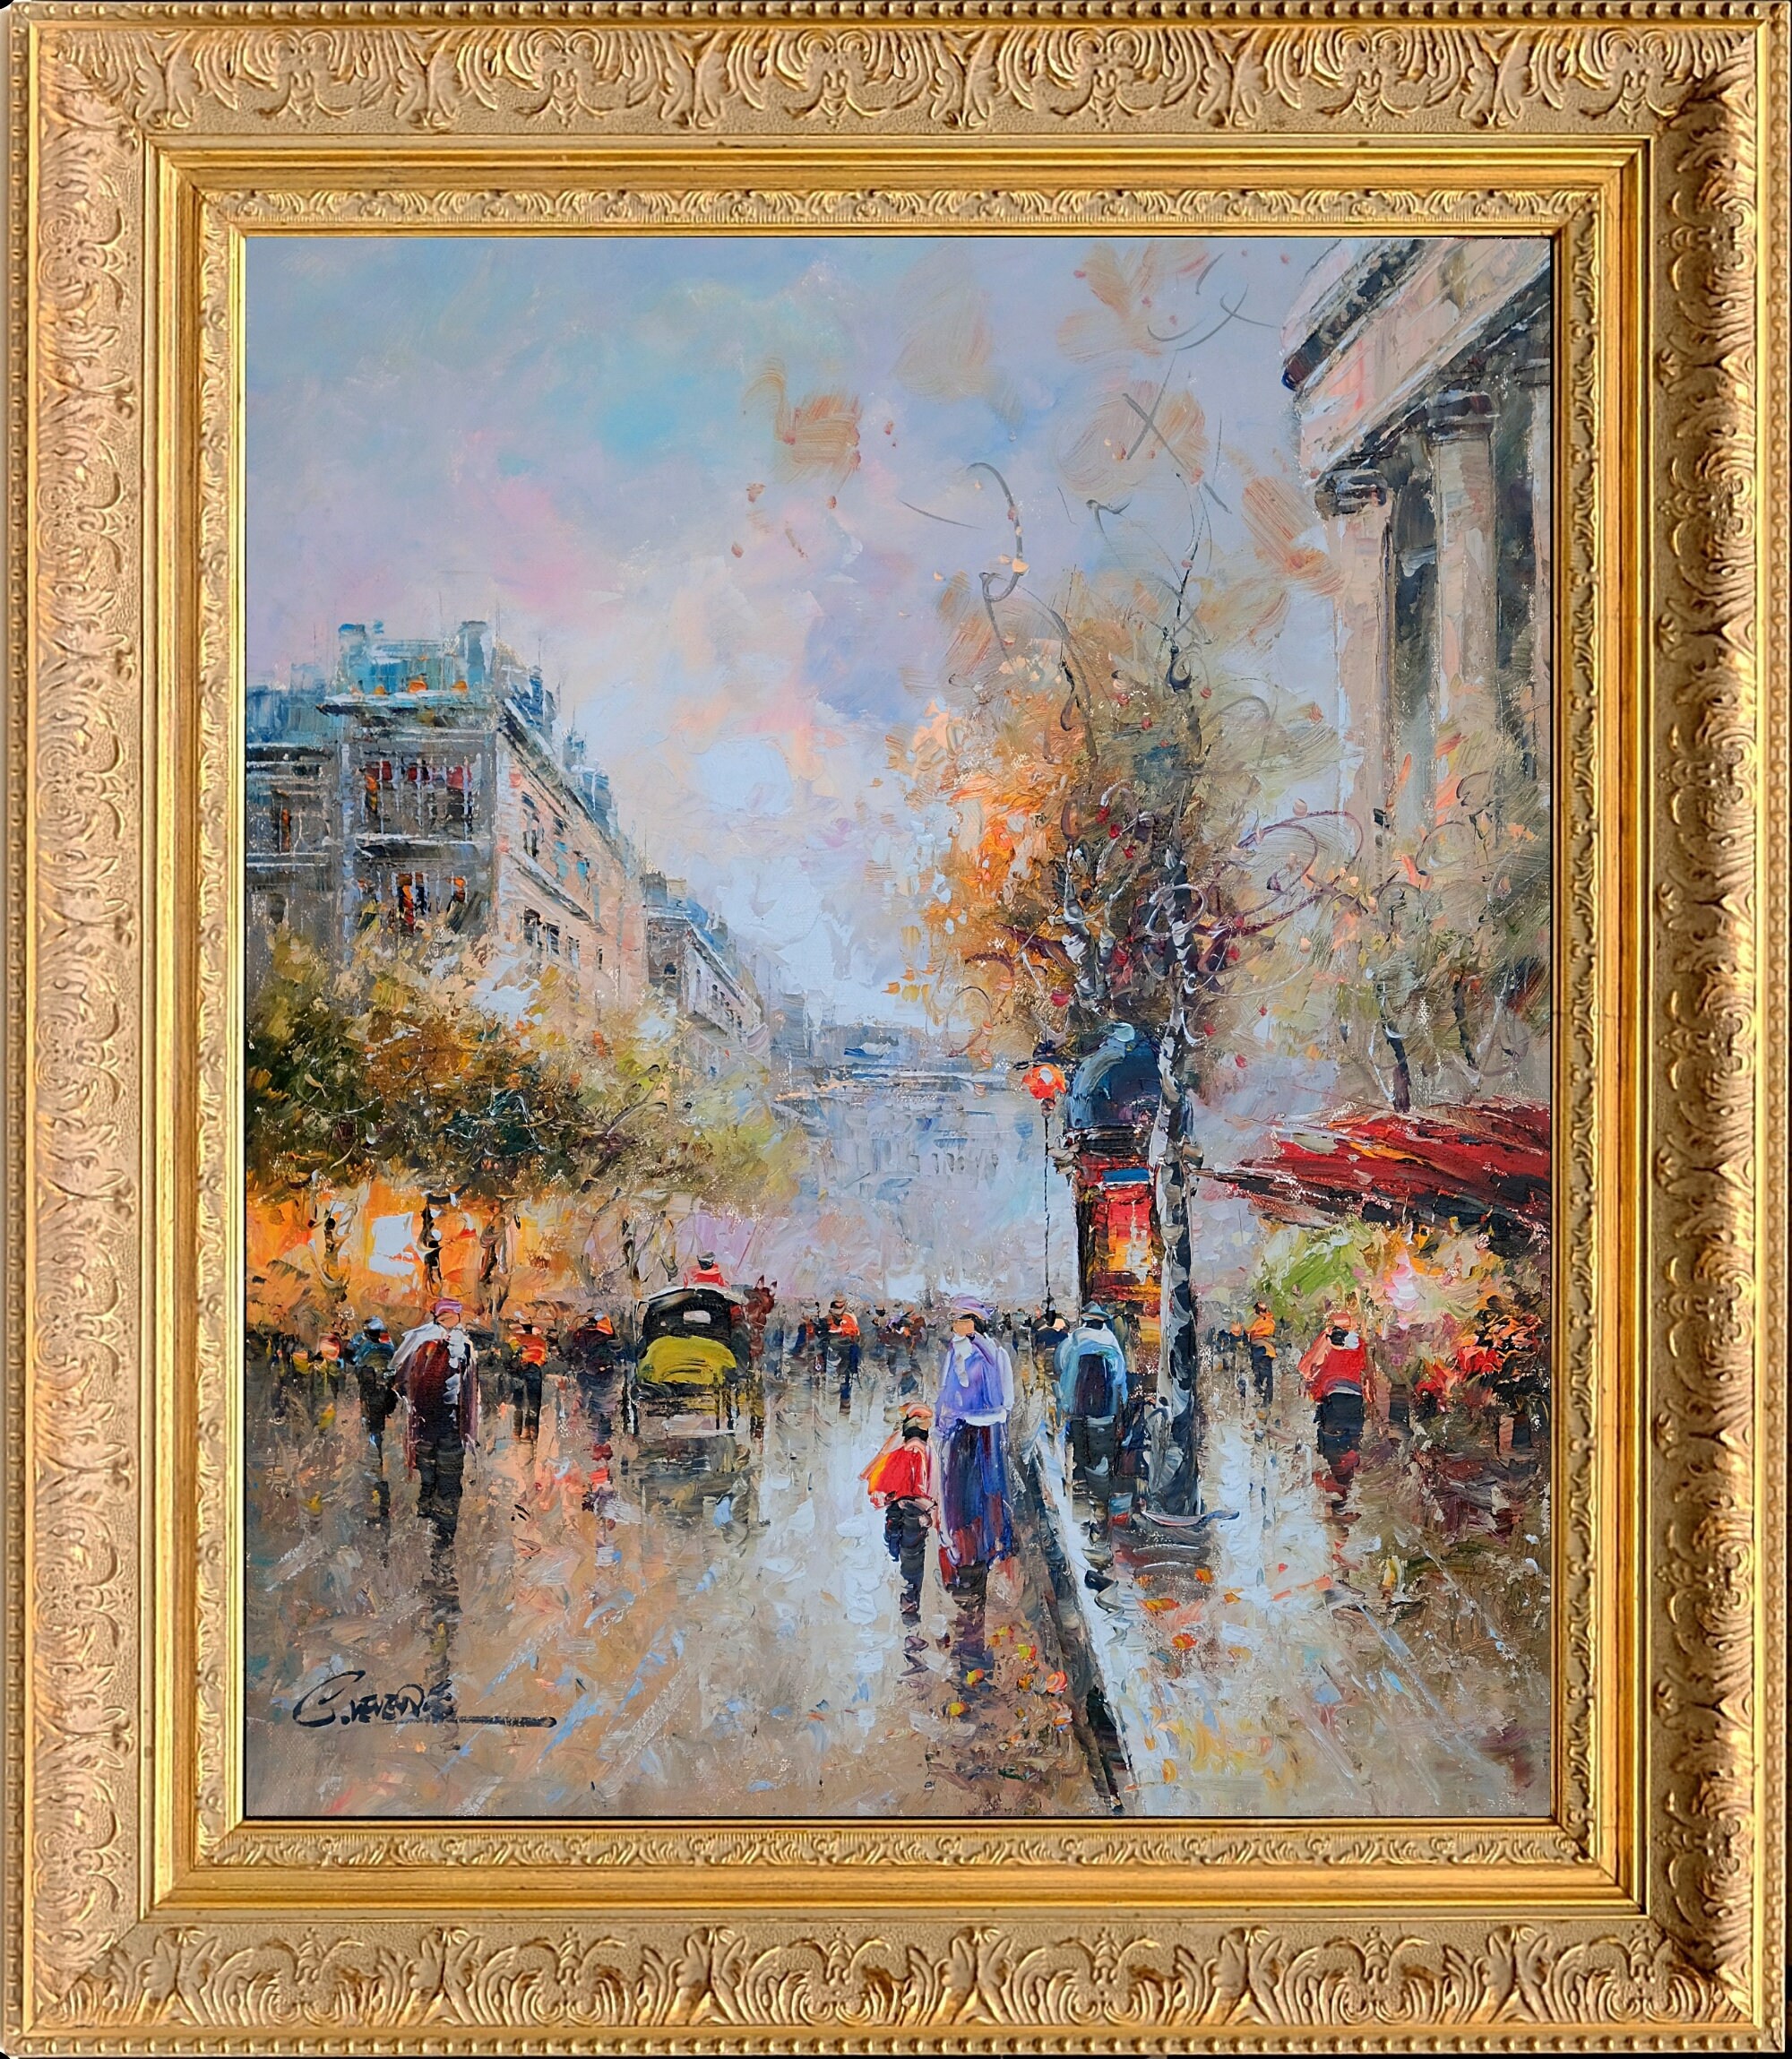 for Memorable Gift Paris Street Horse Carriage with Landscape Paris Cityscape by Jean Gaston Oil Painting with Antique Gold Frame